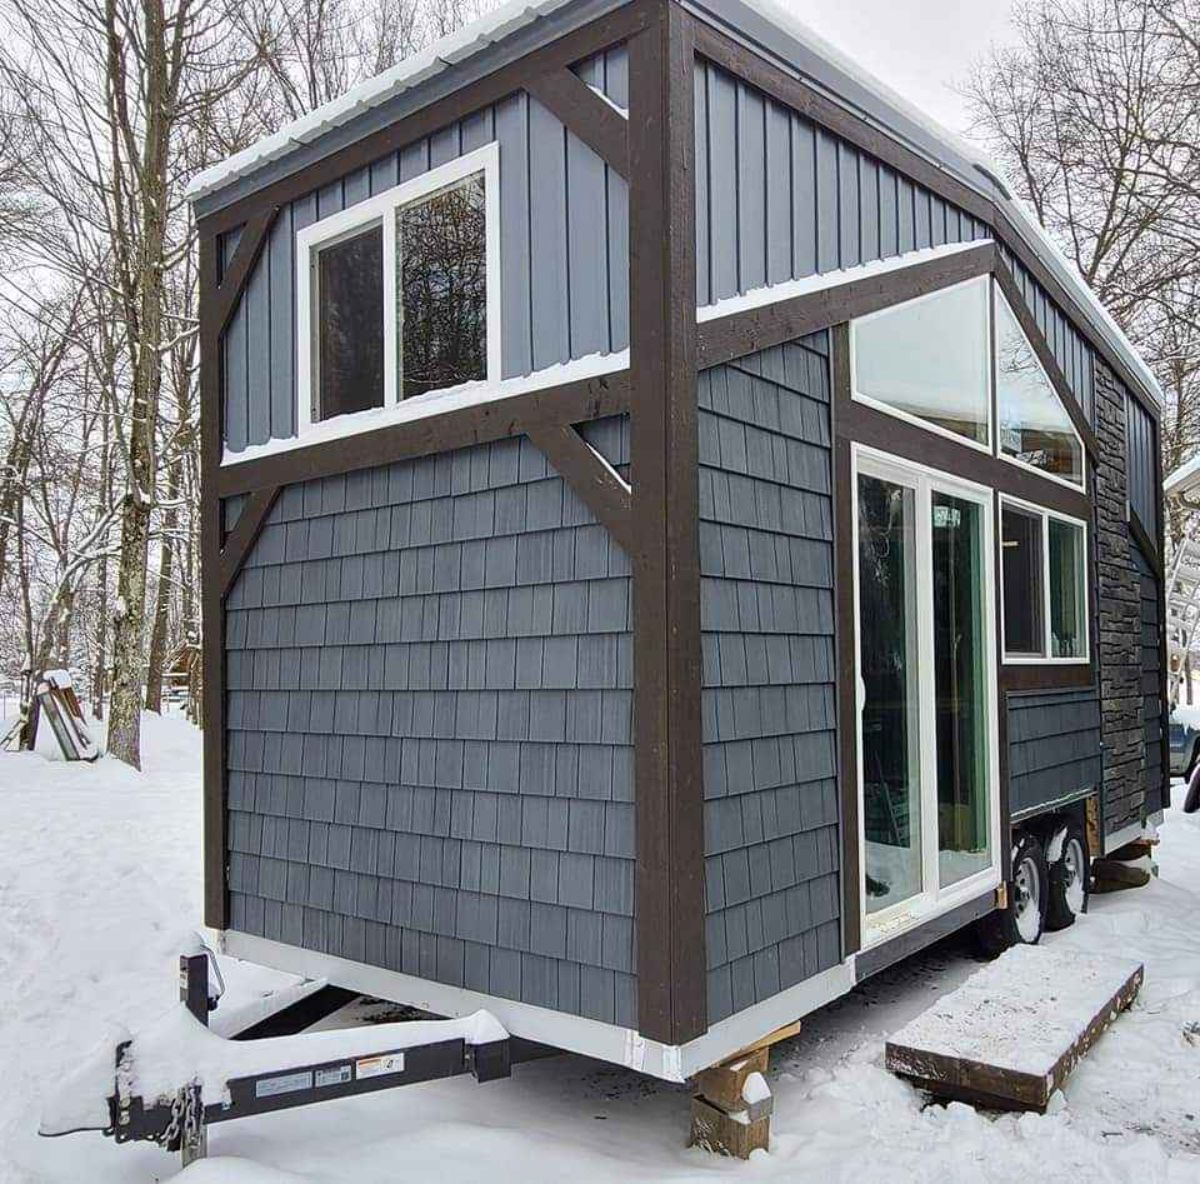 Stunning exterior of 21' Display Model Tiny Home